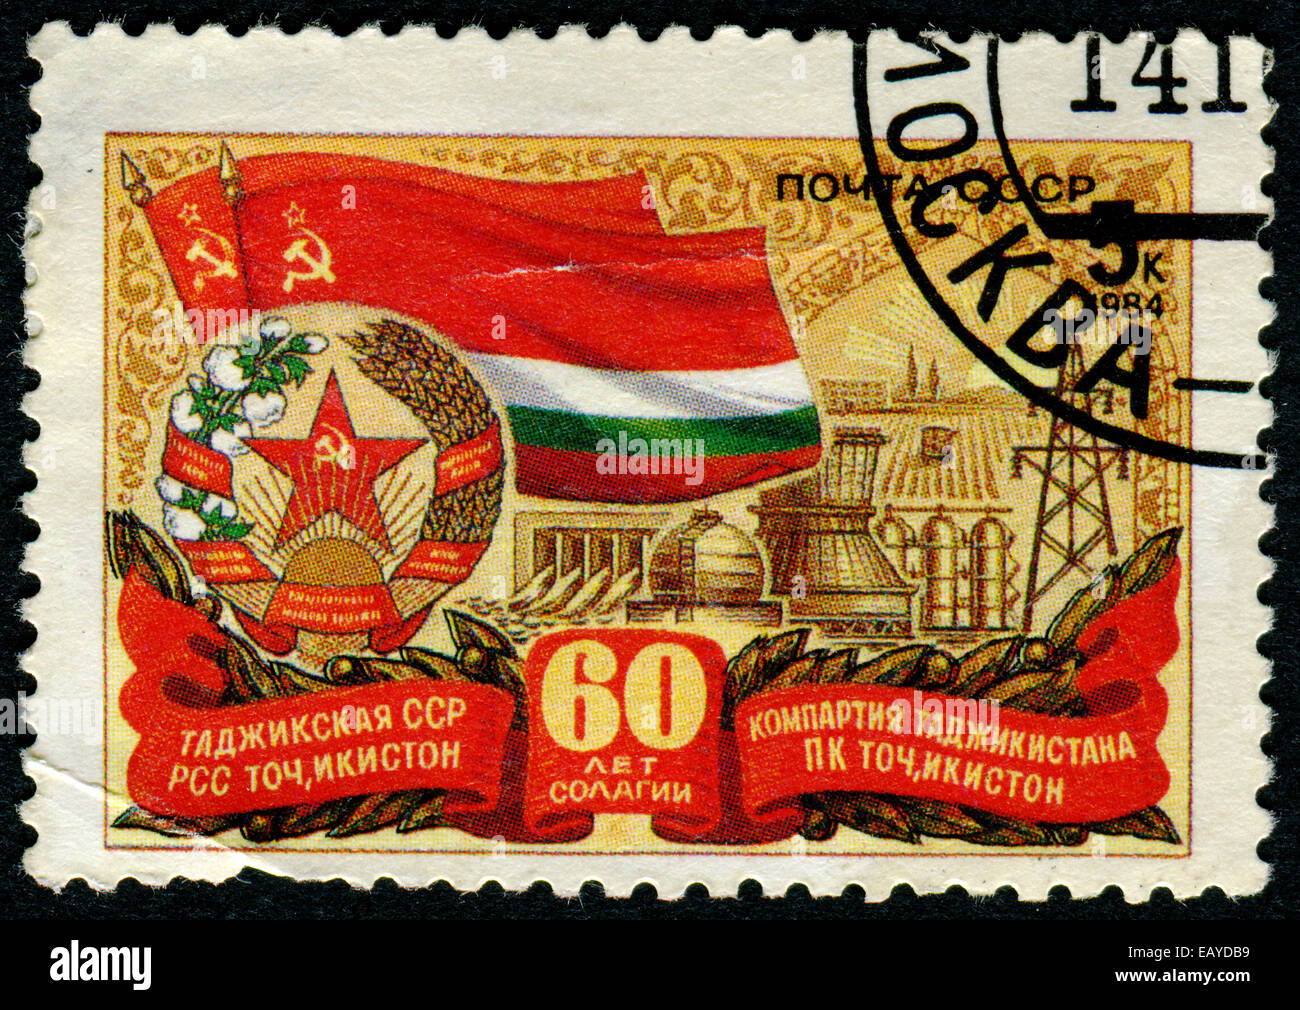 RUSSIA - CIRCA 1984: stamp printed by Russia, shows Tadzhik Soviet Socialist Republik flags and arms, circa 1984 Stock Photo